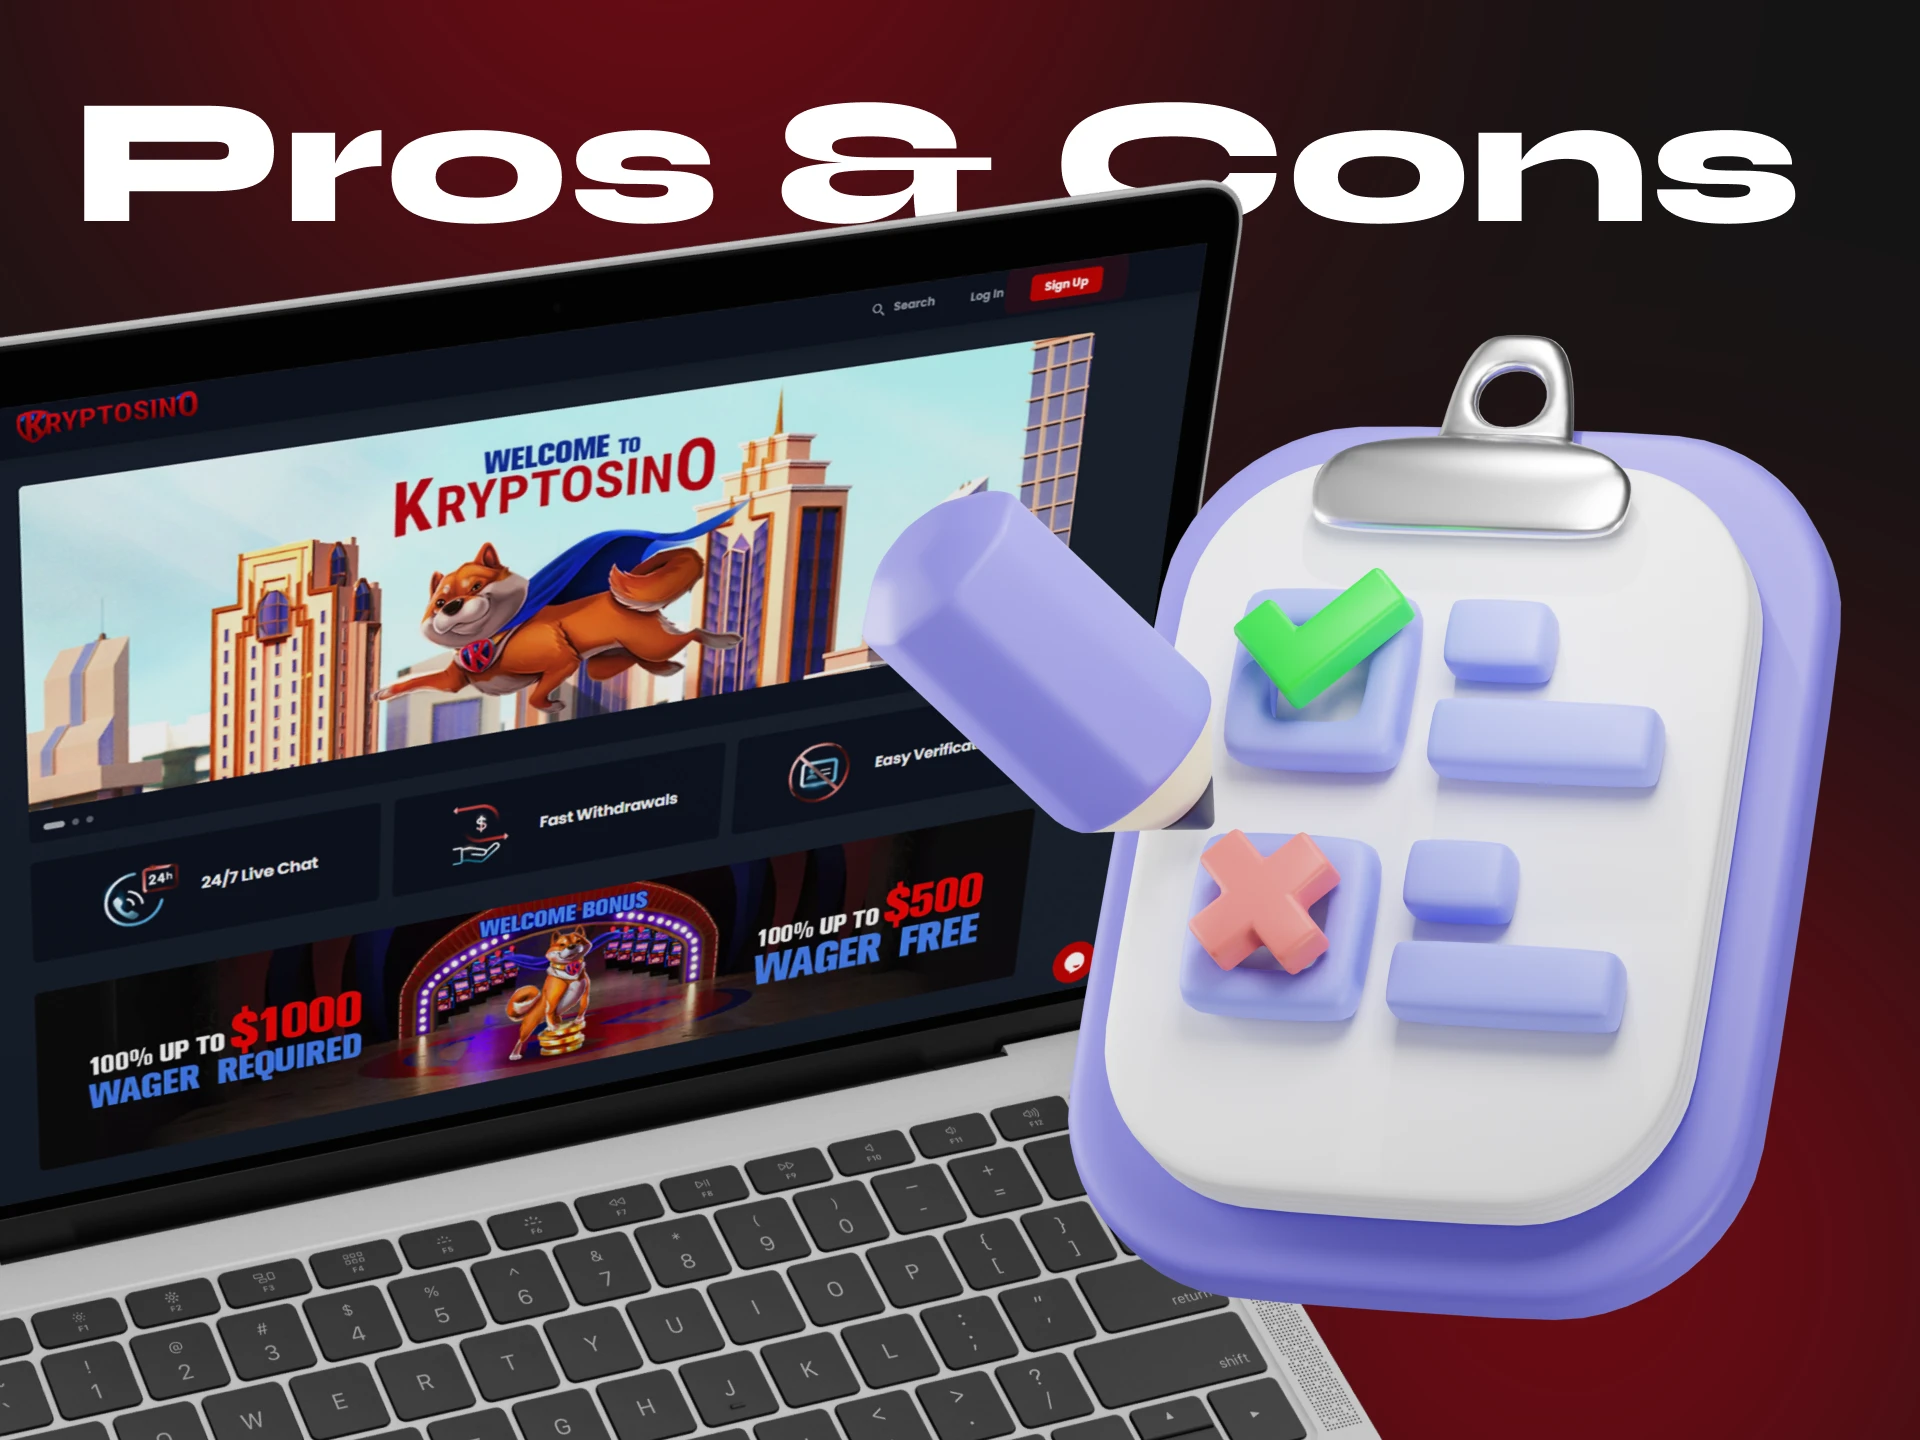 Before you start placing bets at Kryptosino crypto casino, familiarize yourself with its pros and cons.